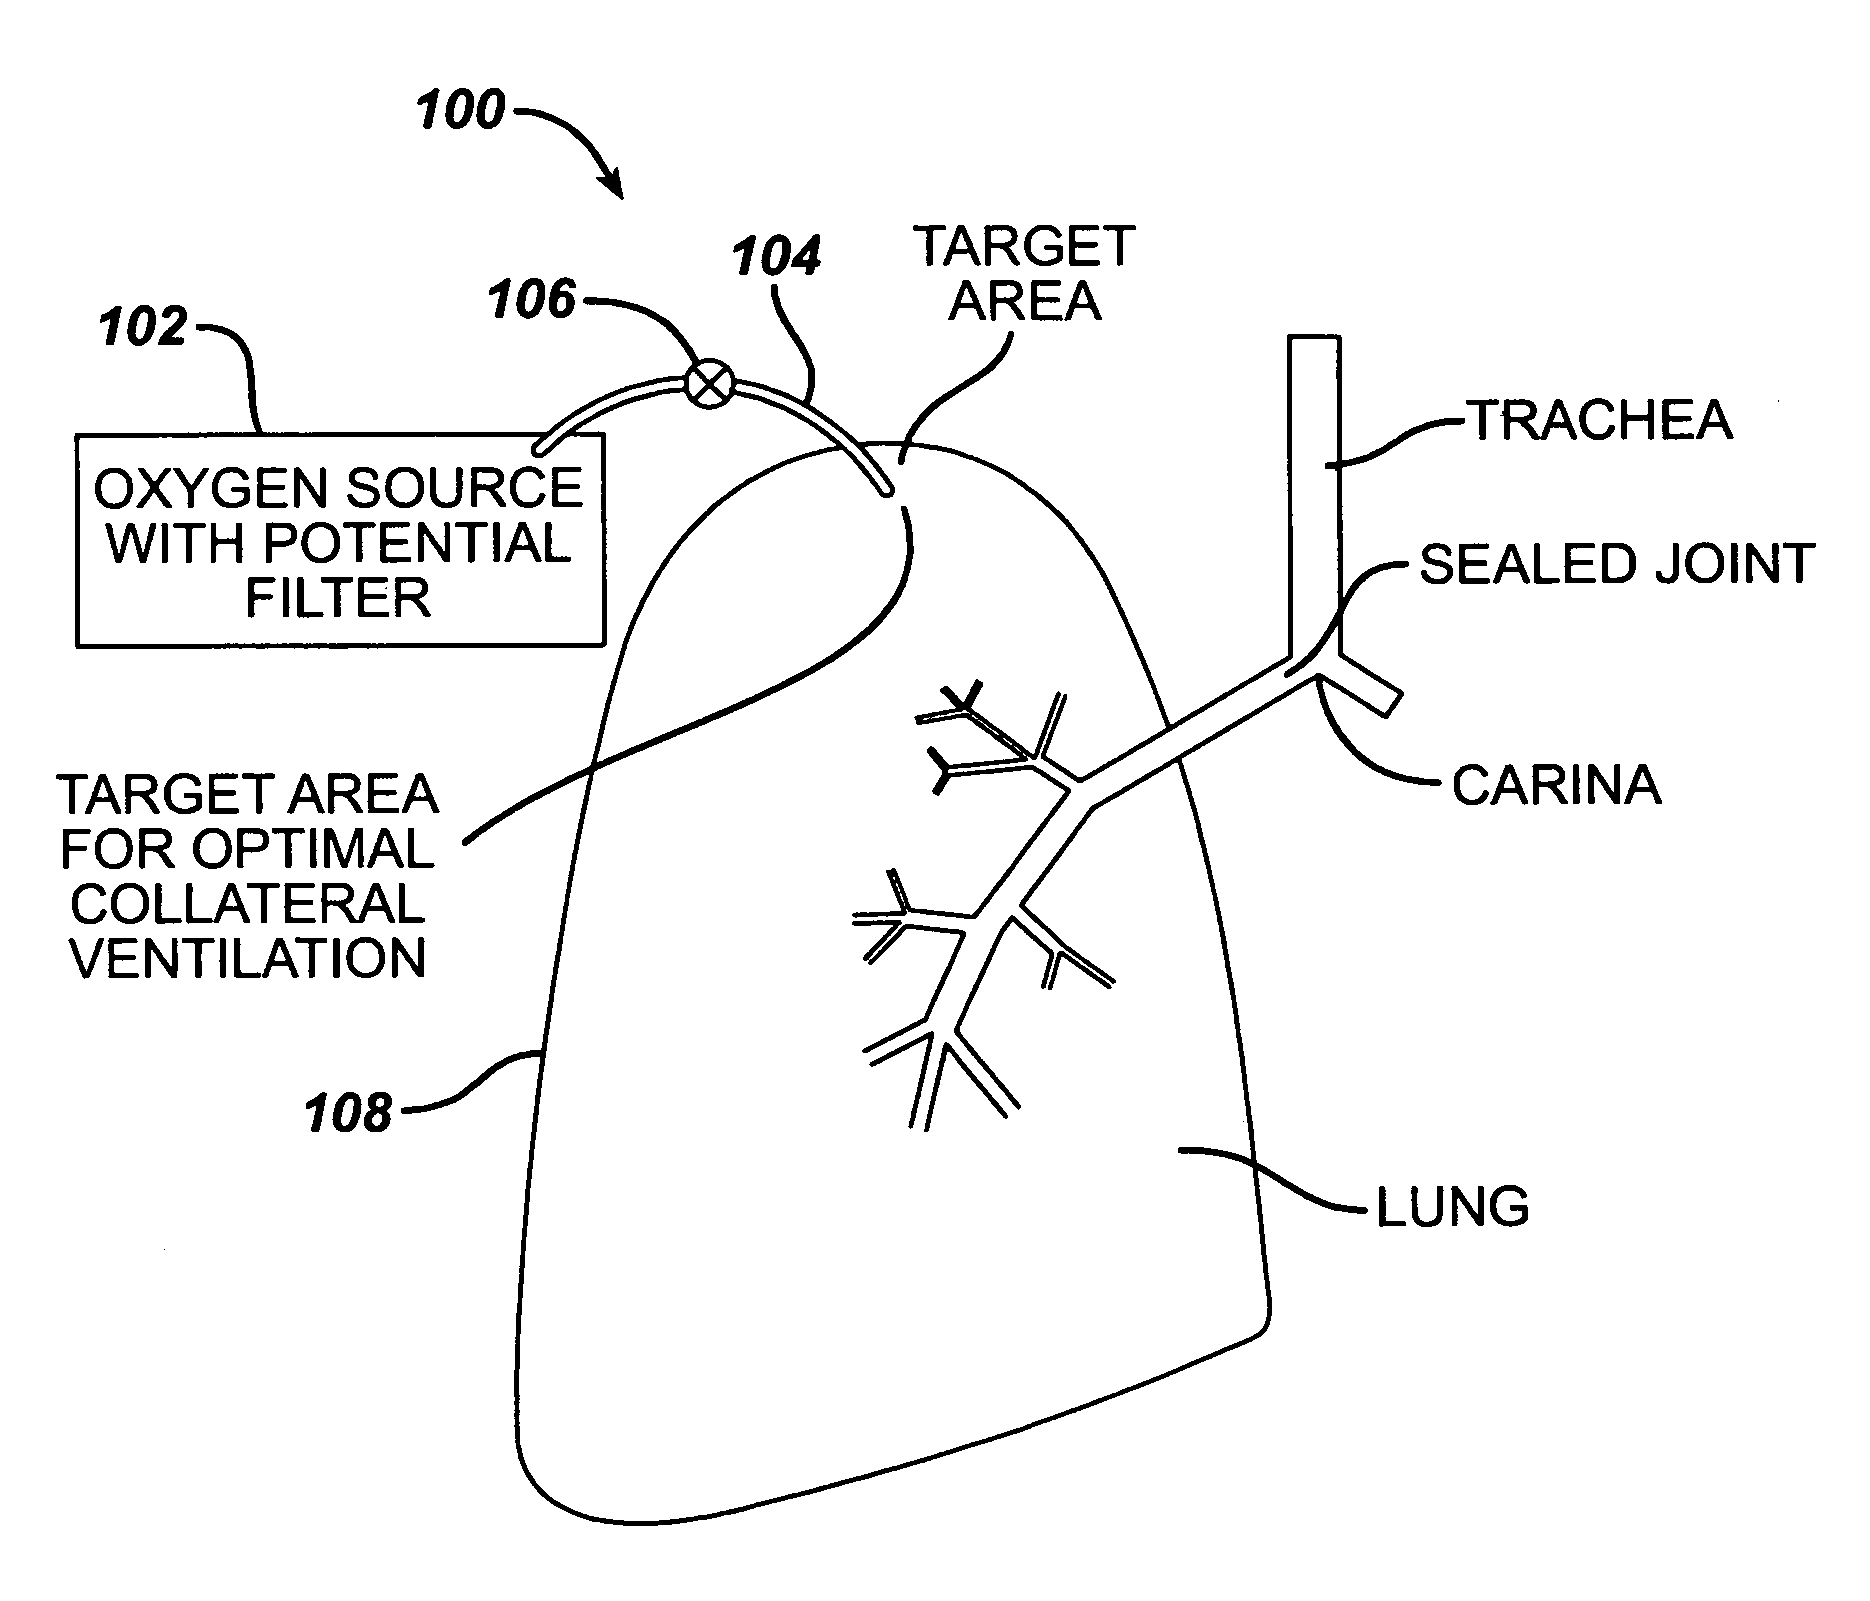 Lung reduction system